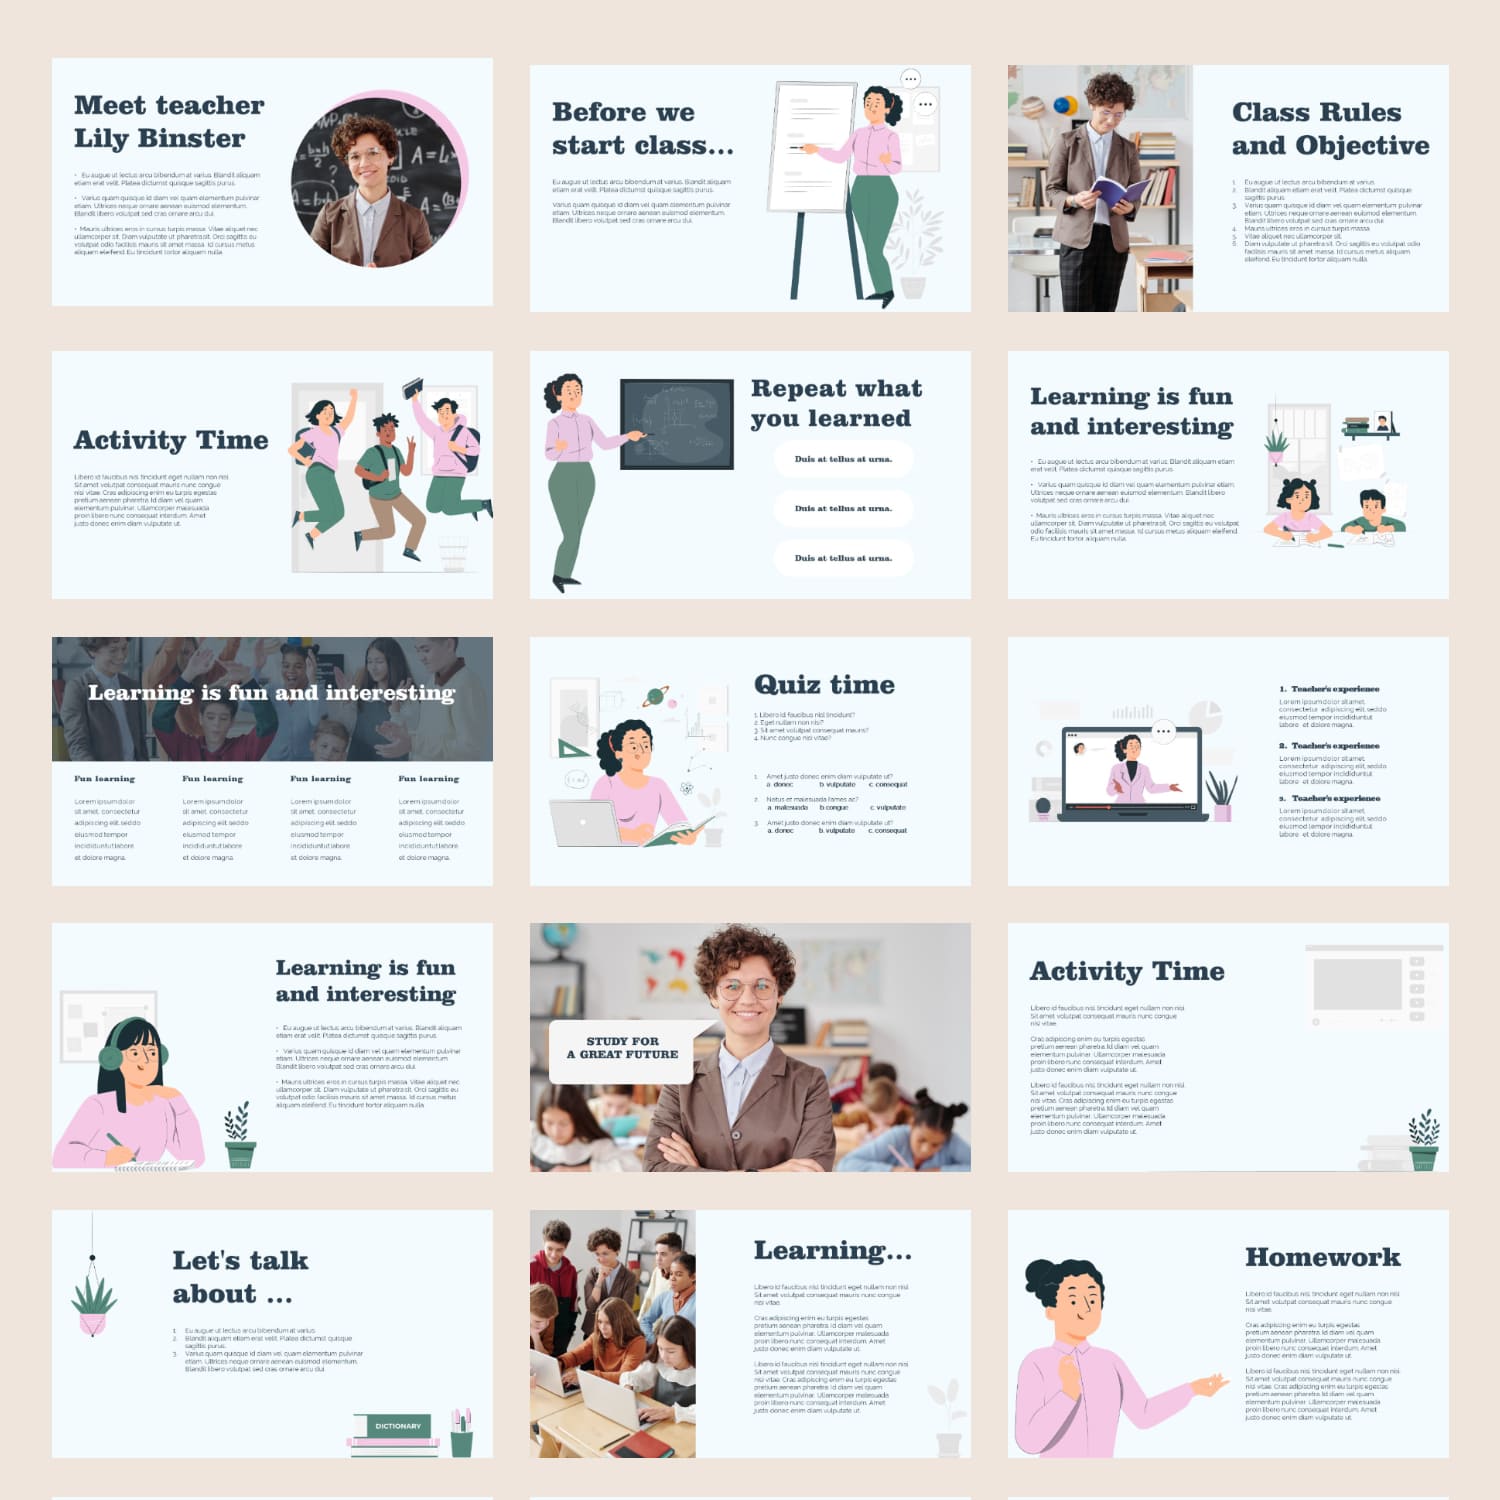 Get to Know Your Teacher Powerpoint Template cover.